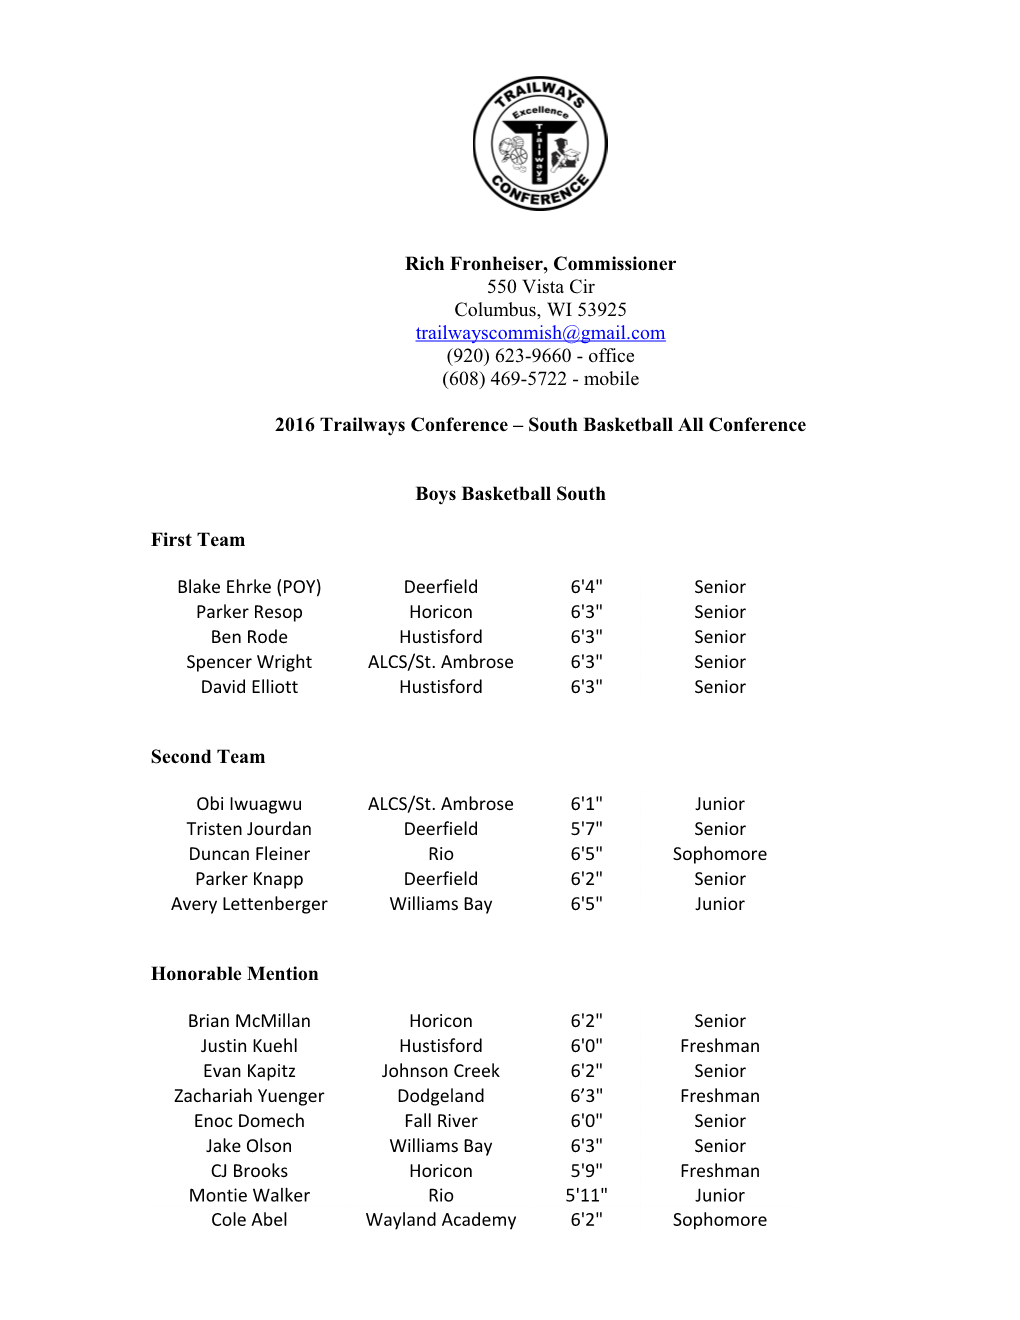 2016 Trailways Conference South Basketball All Conference